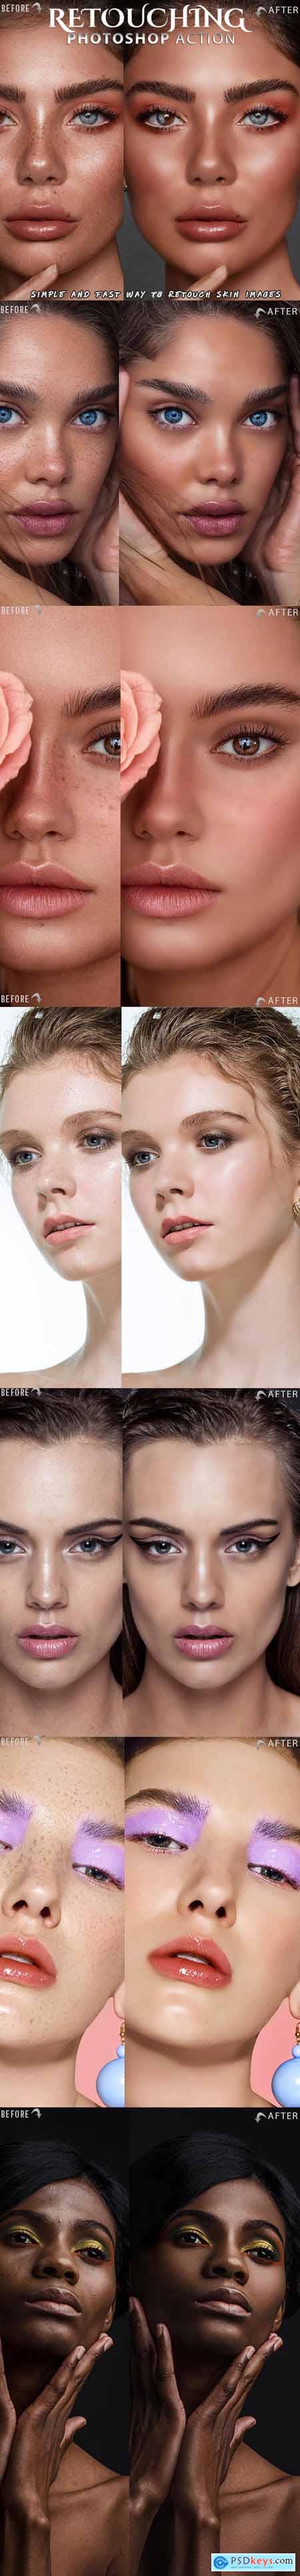 Skin Retouch Photoshop Action 25828641